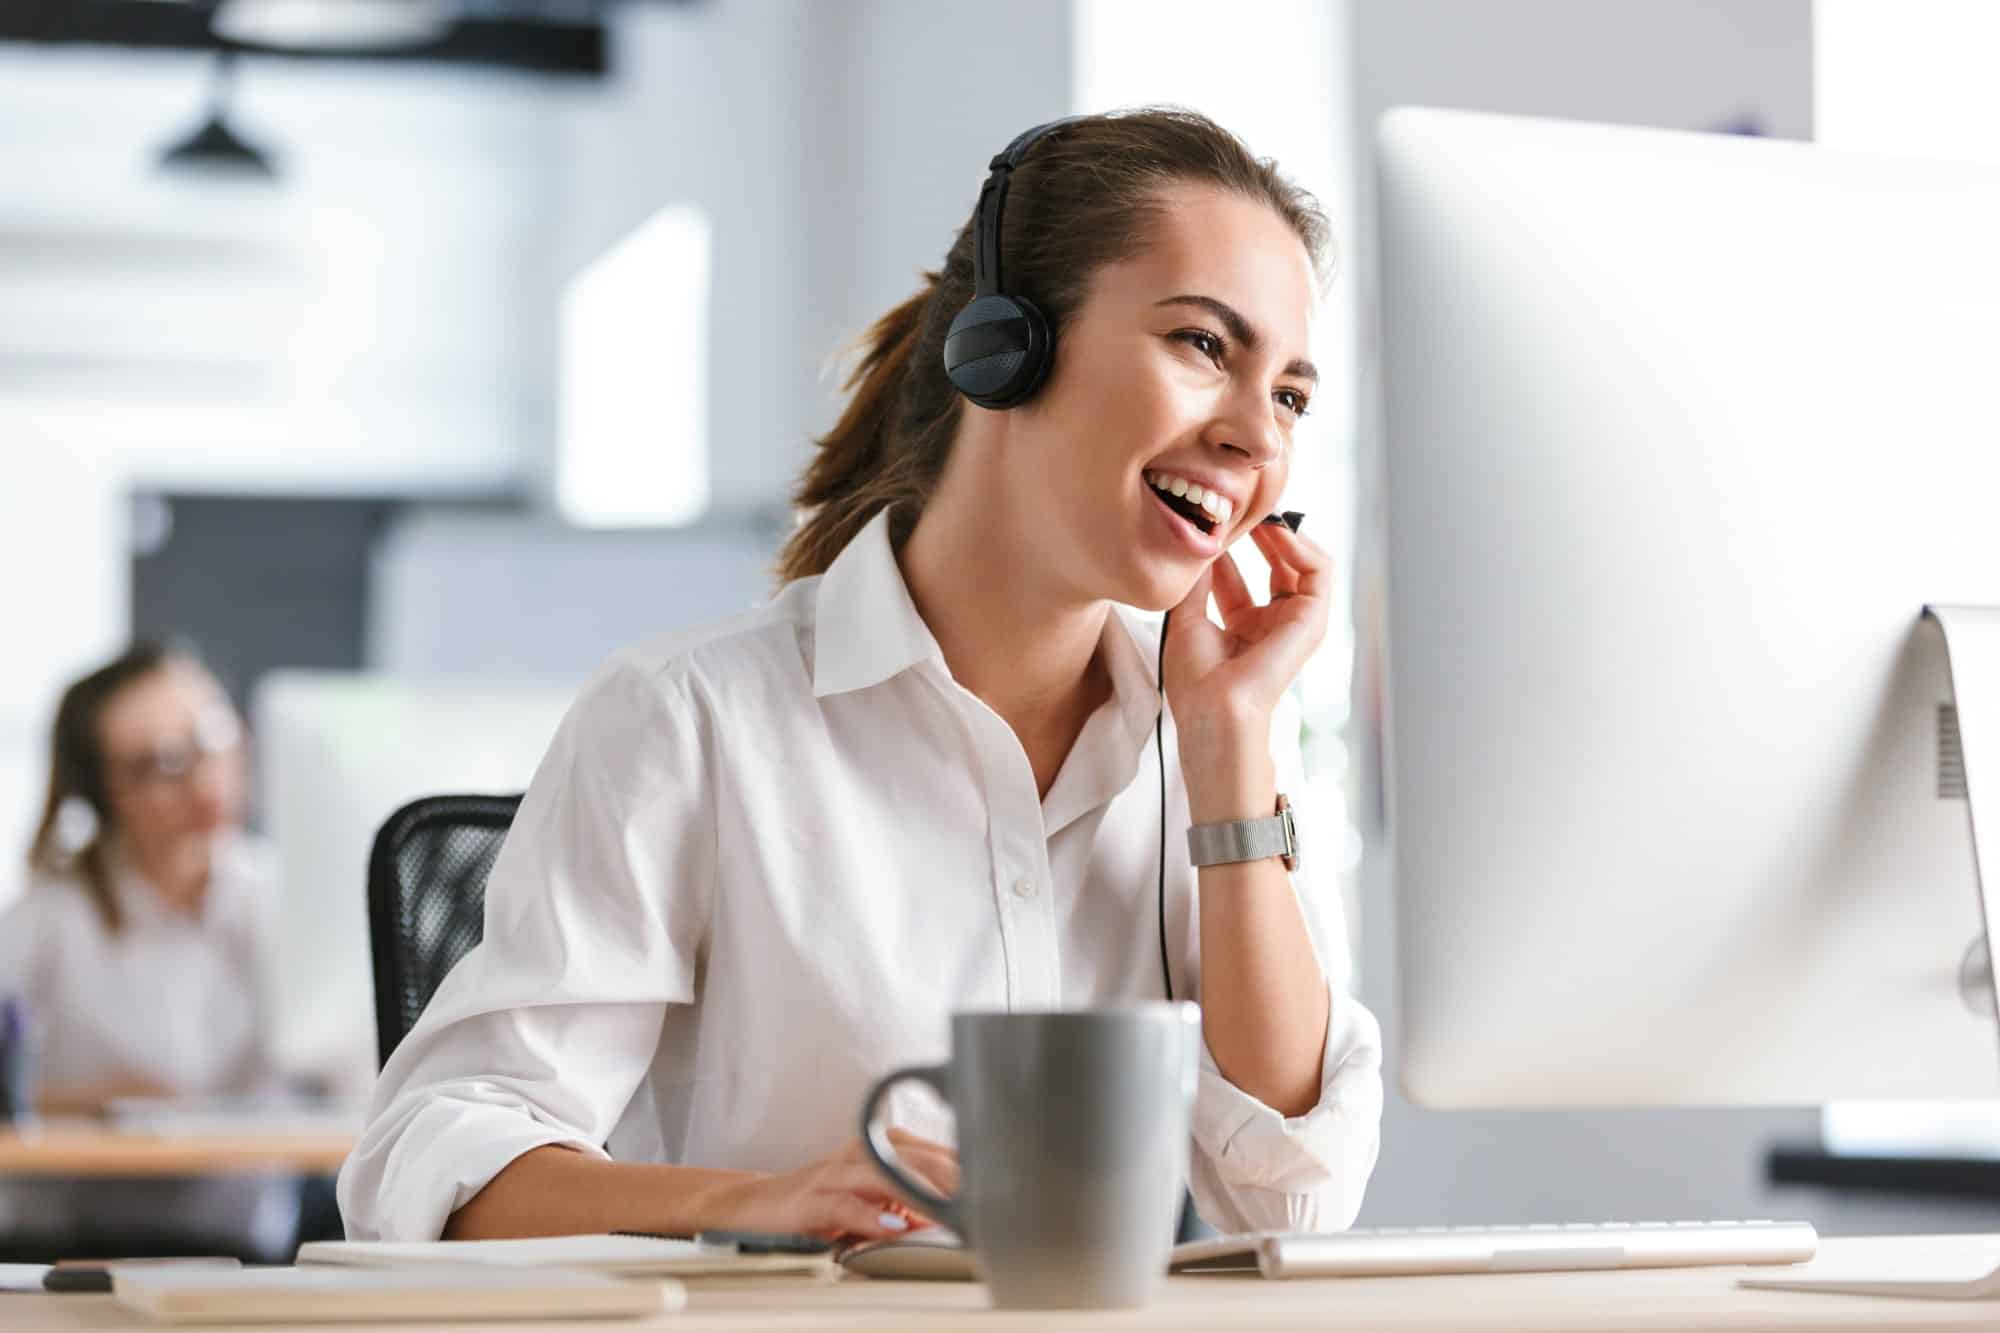 business woman in office callcenter working with computer wearing headphones